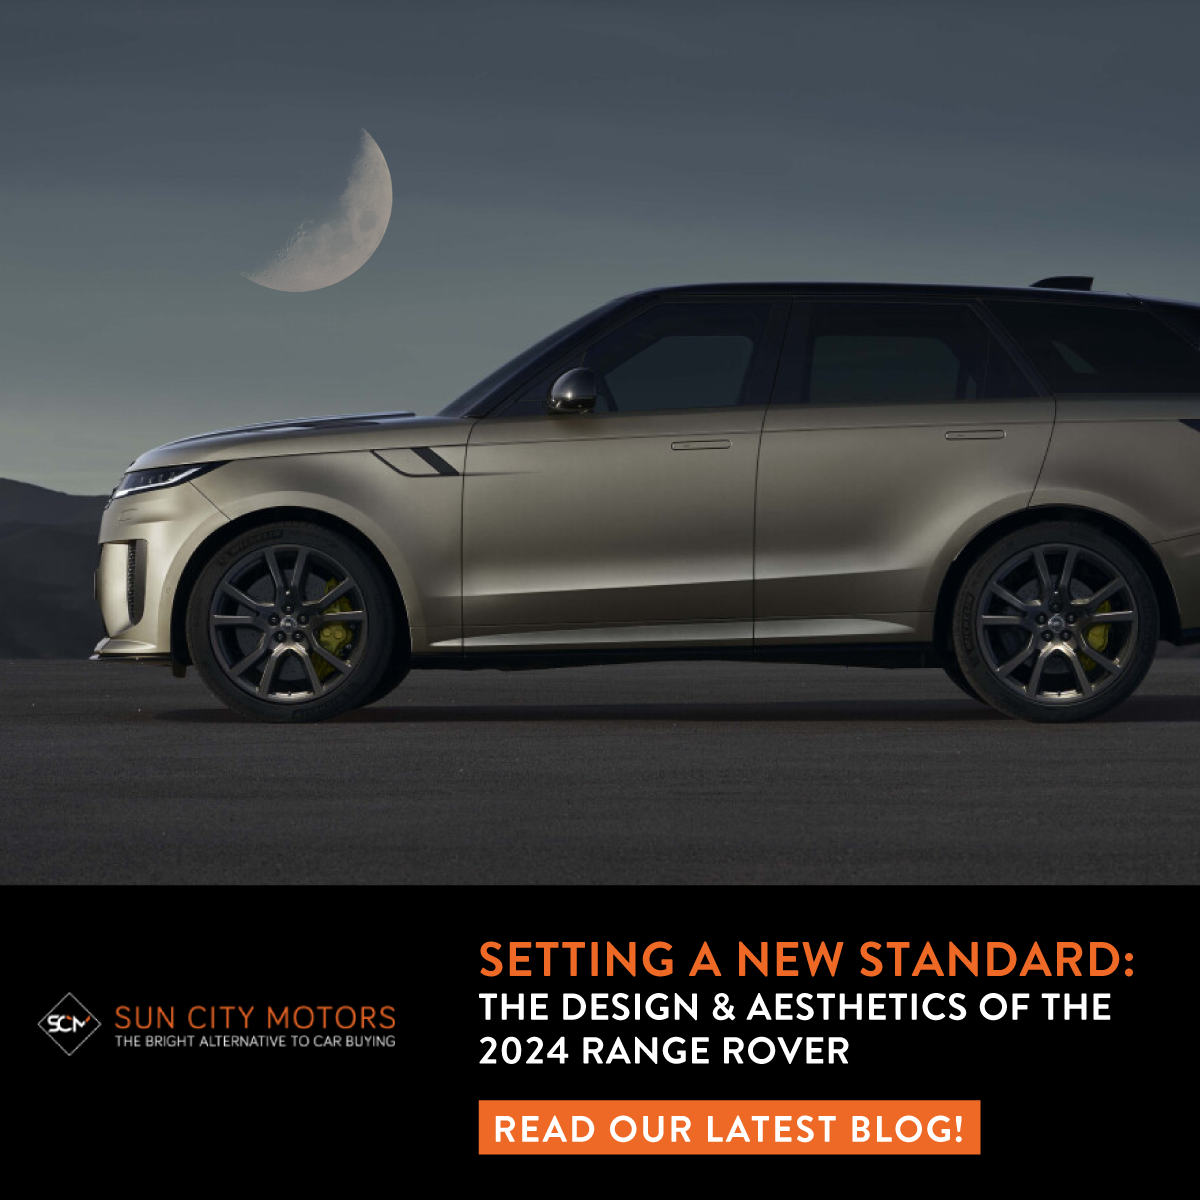 Setting a New Standard: The Design & Aesthetics of the 2024 Range Rover